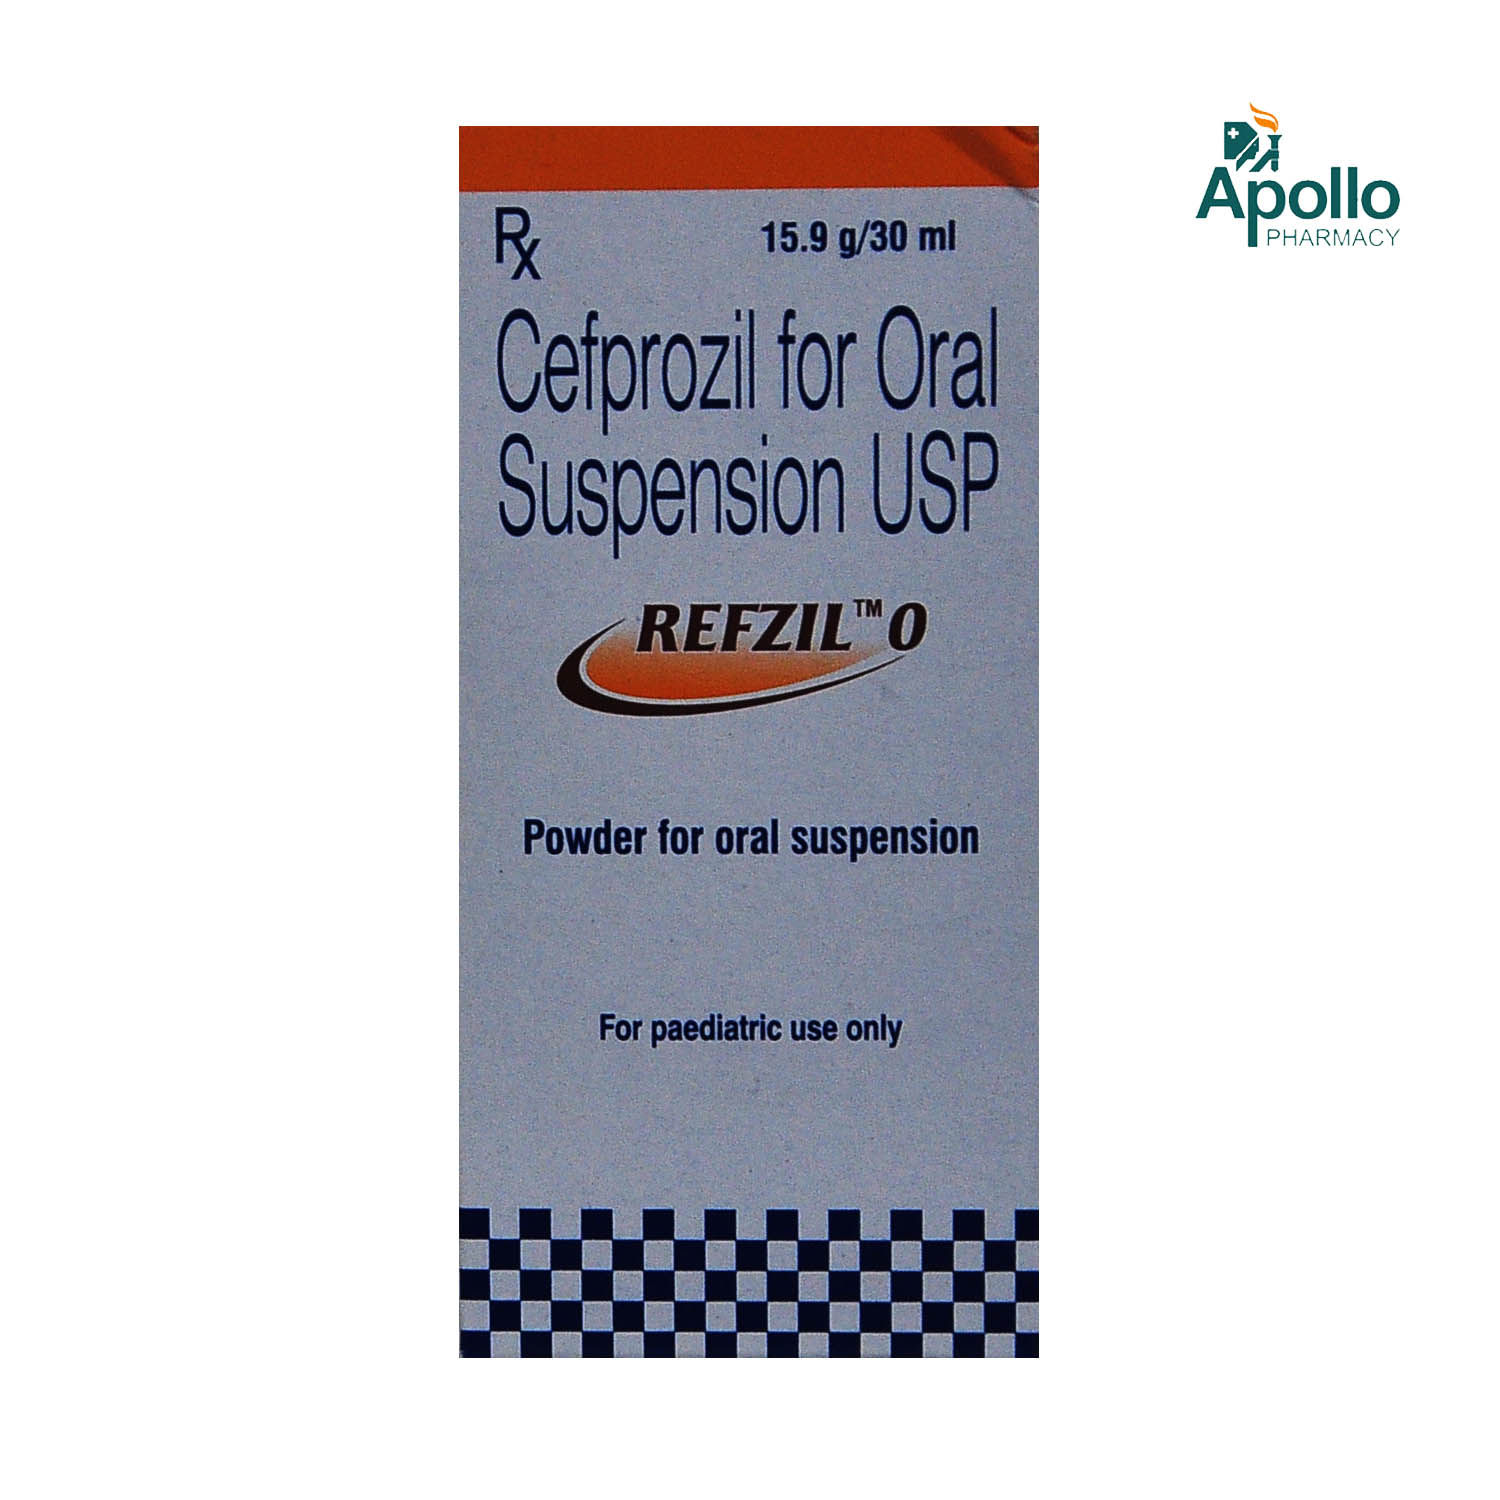 Refzil O Oral Suspension 30 ml, Pack of 1 LIQUID